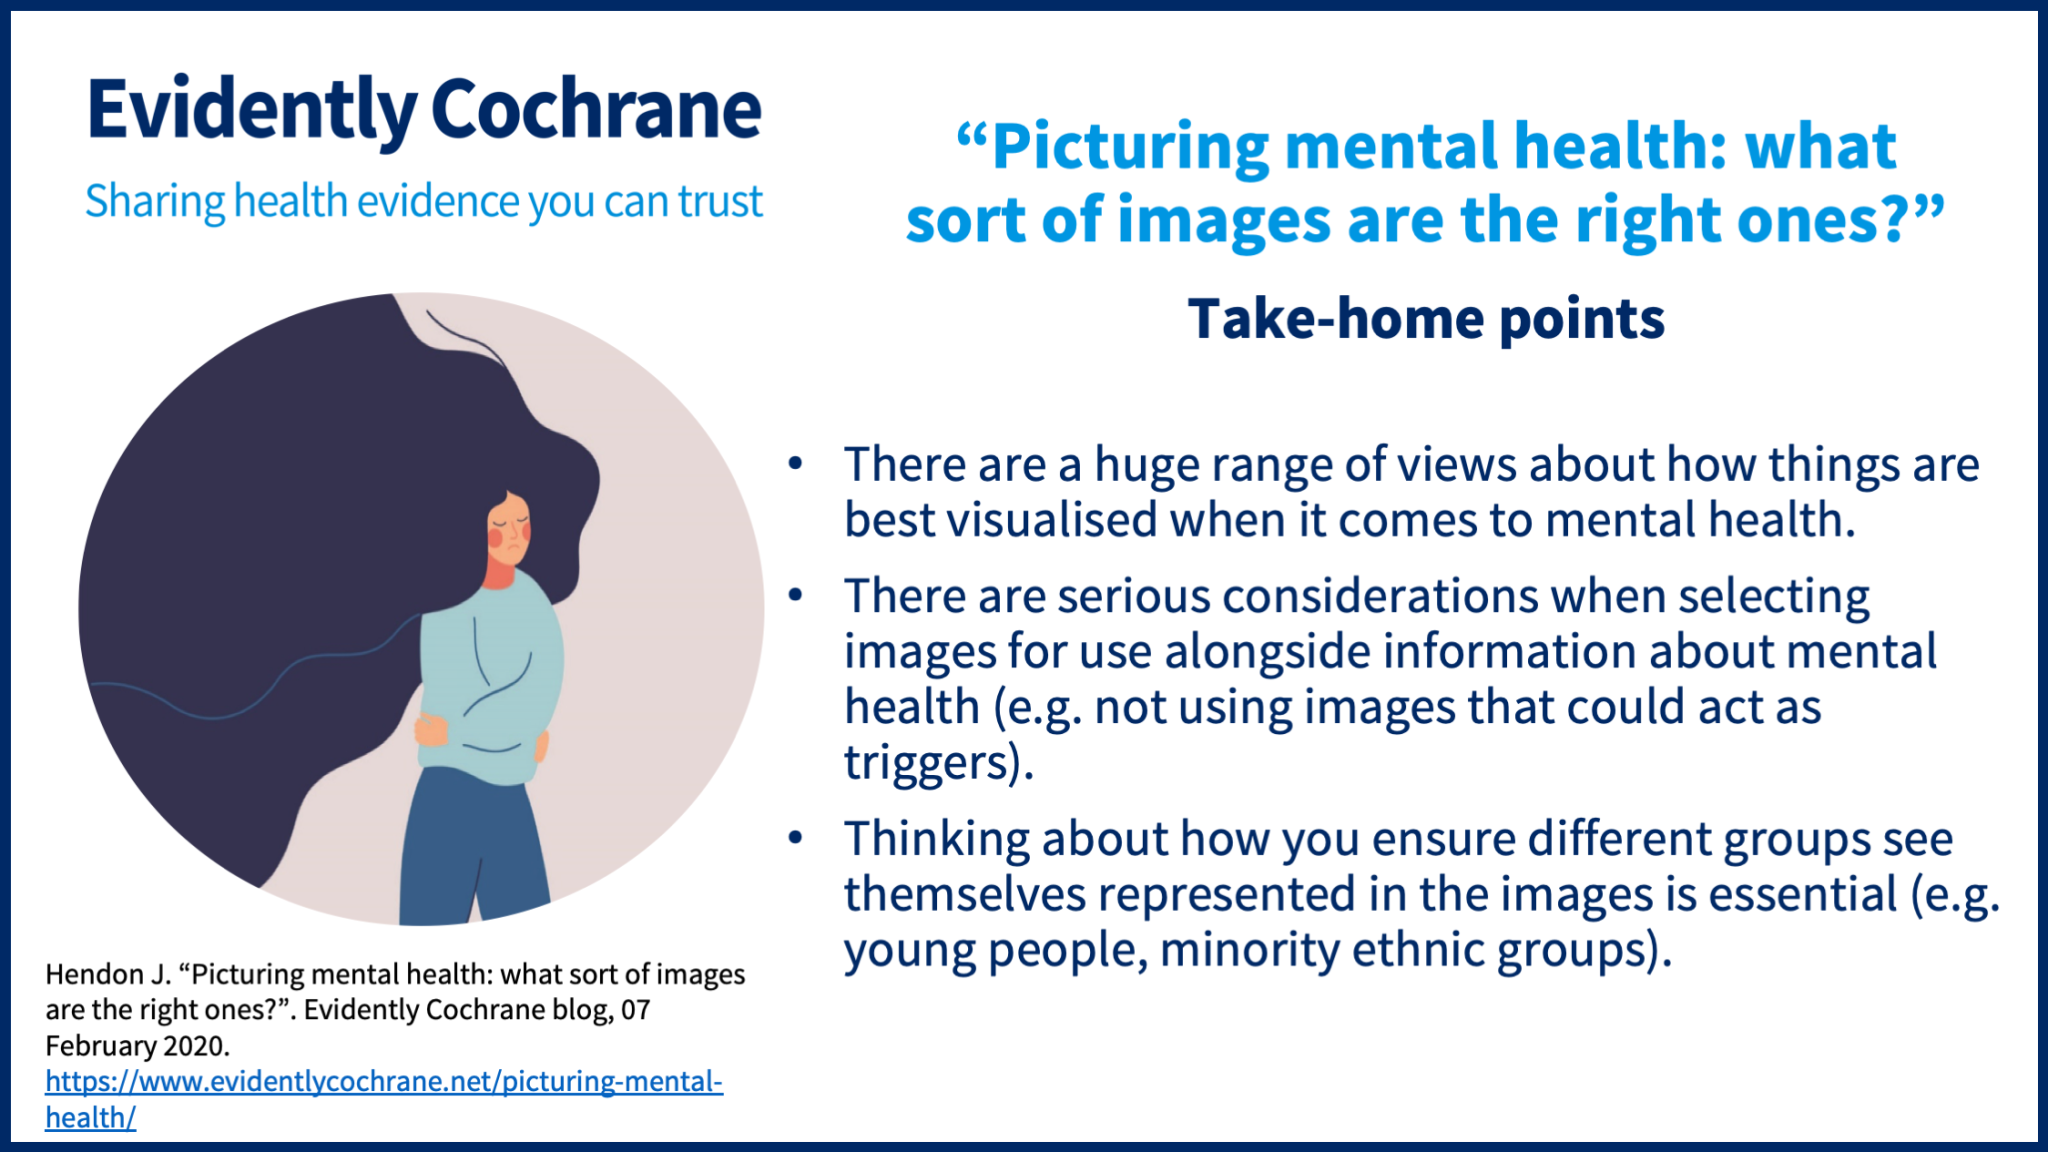 There are a huge range of views about how things are best visualised when it comes to mental health; There are serious considerations when selecting images for use alongside mental health information (such as avoiding triggers); Thinking about how different groups see themselves represented in the images is essential (eg young people, minority ethnic groups)